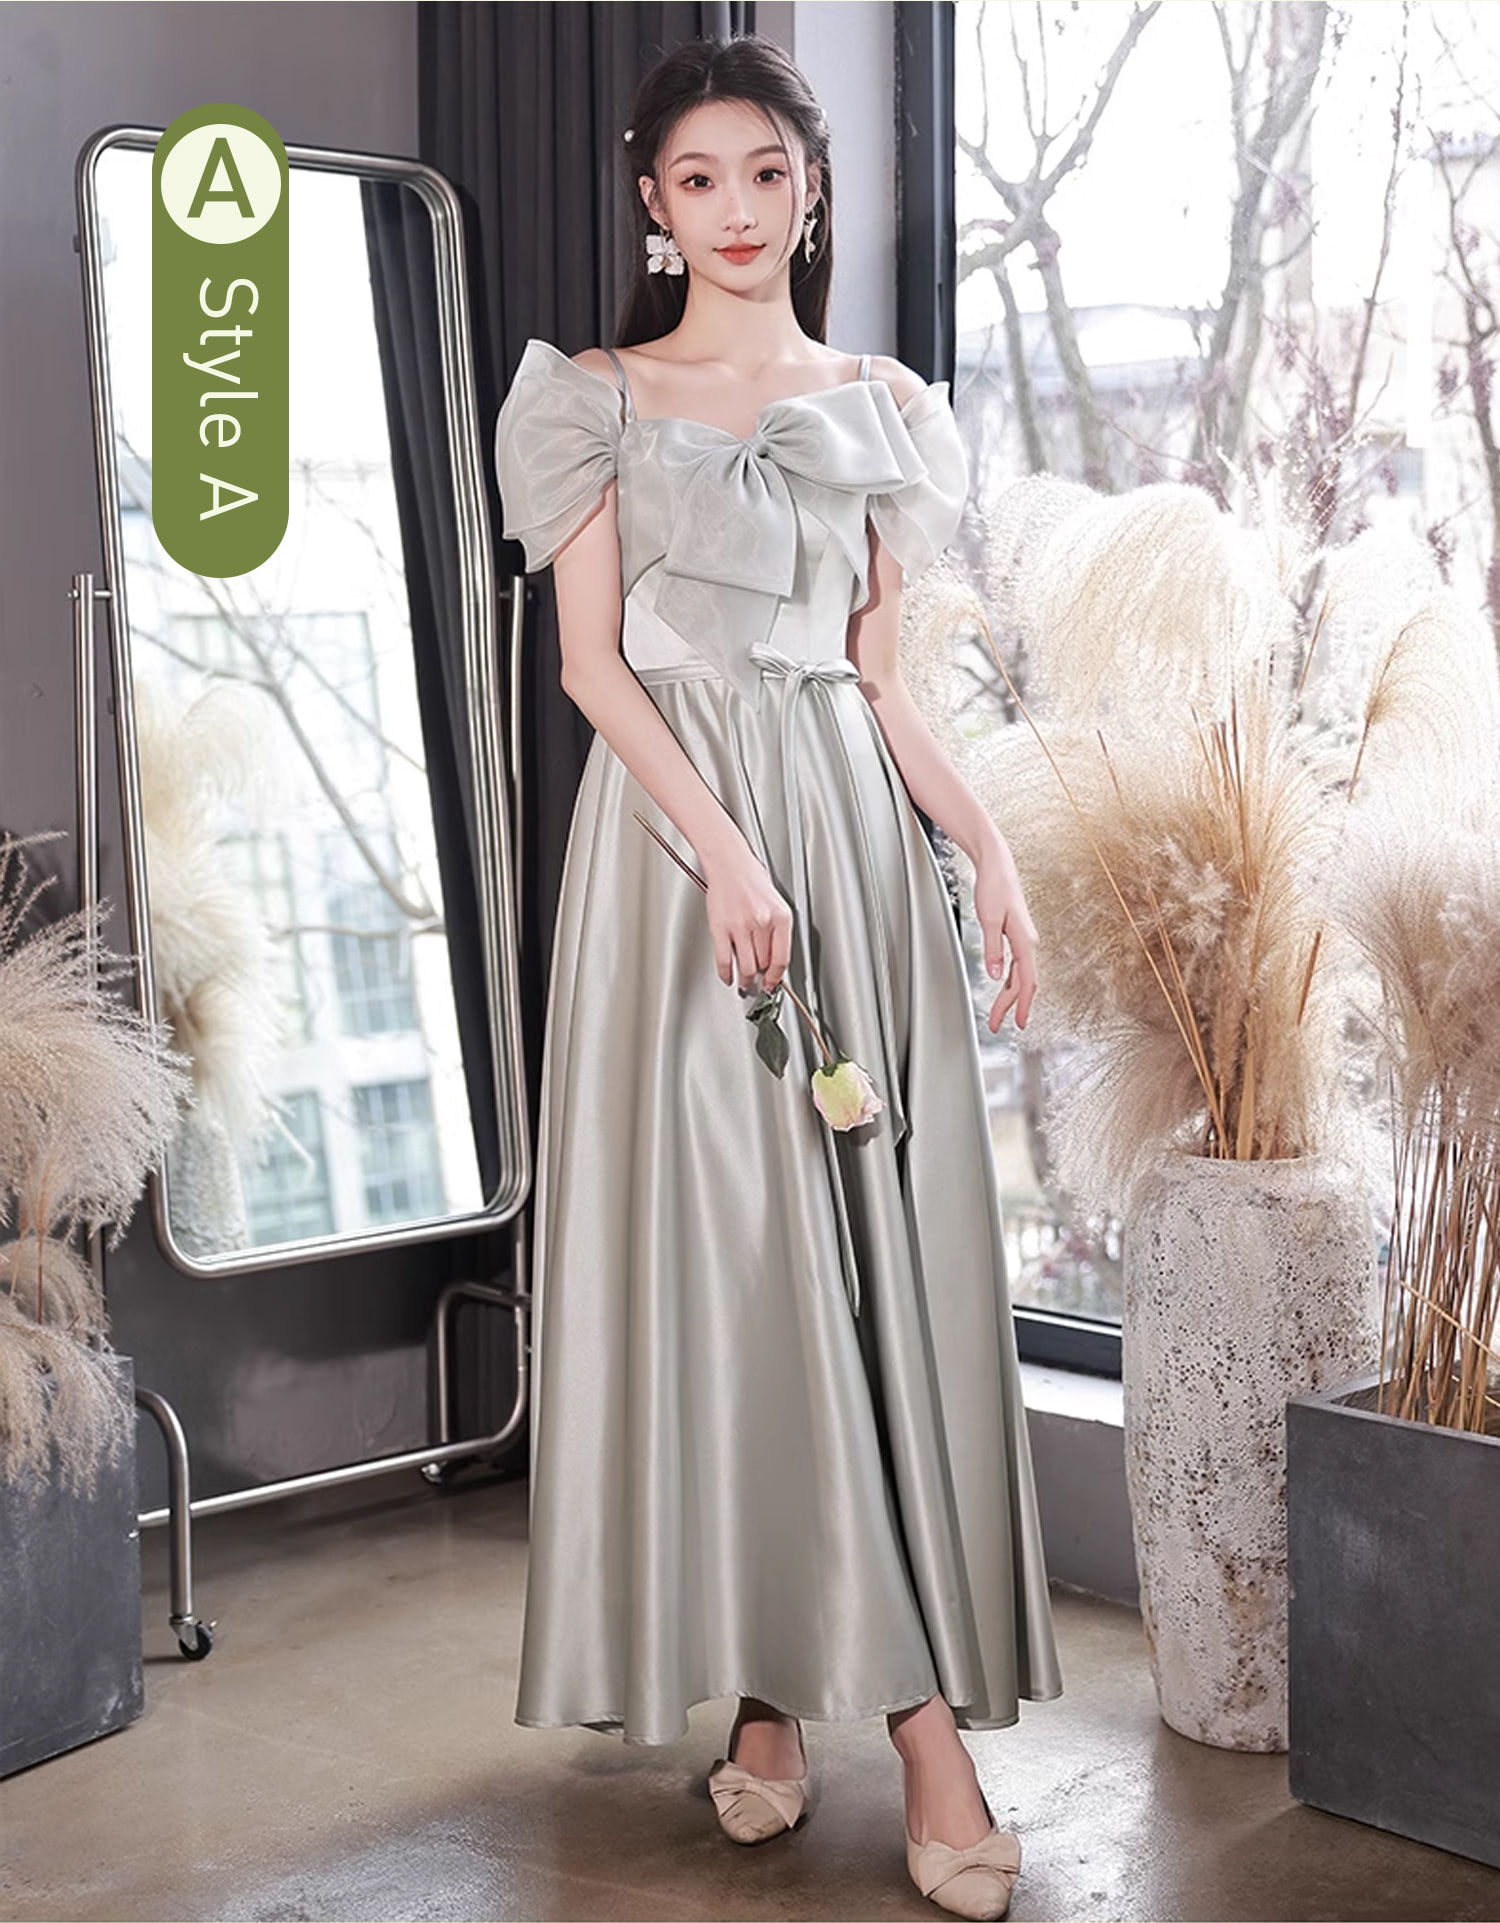 Simple-Gray-Satin-Bridesmaid-Dress-Sweet-Casual-Party-Ball-Gown18